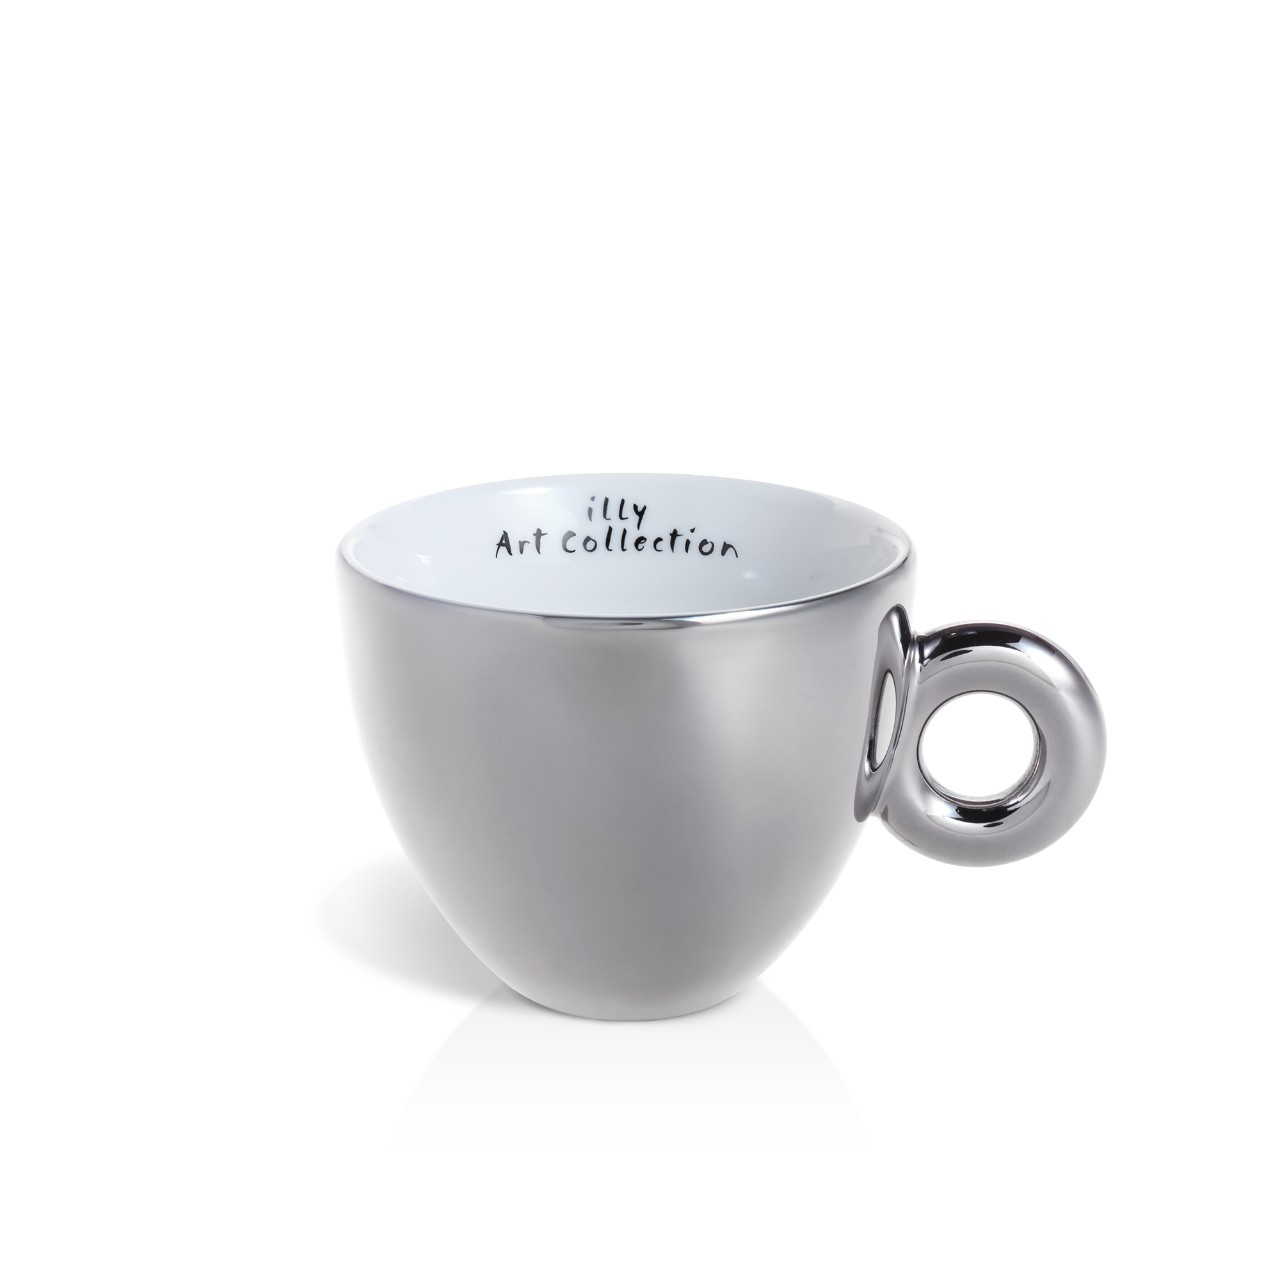 Sagmeister Cappuccino Cups - Set of 4 Cups